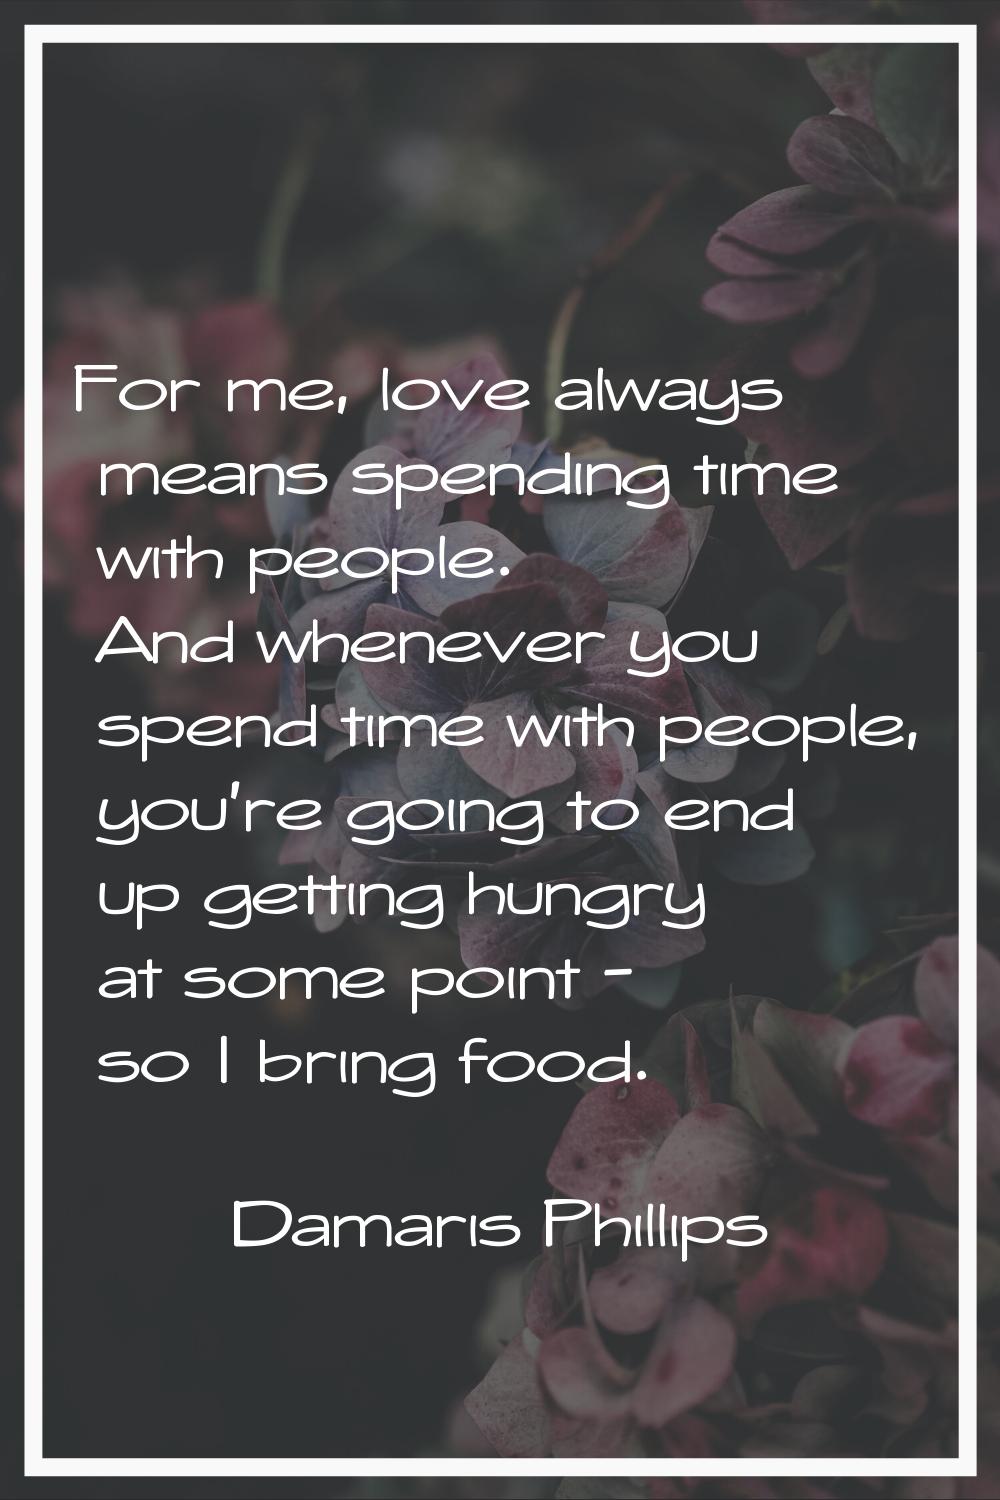 For me, love always means spending time with people. And whenever you spend time with people, you'r